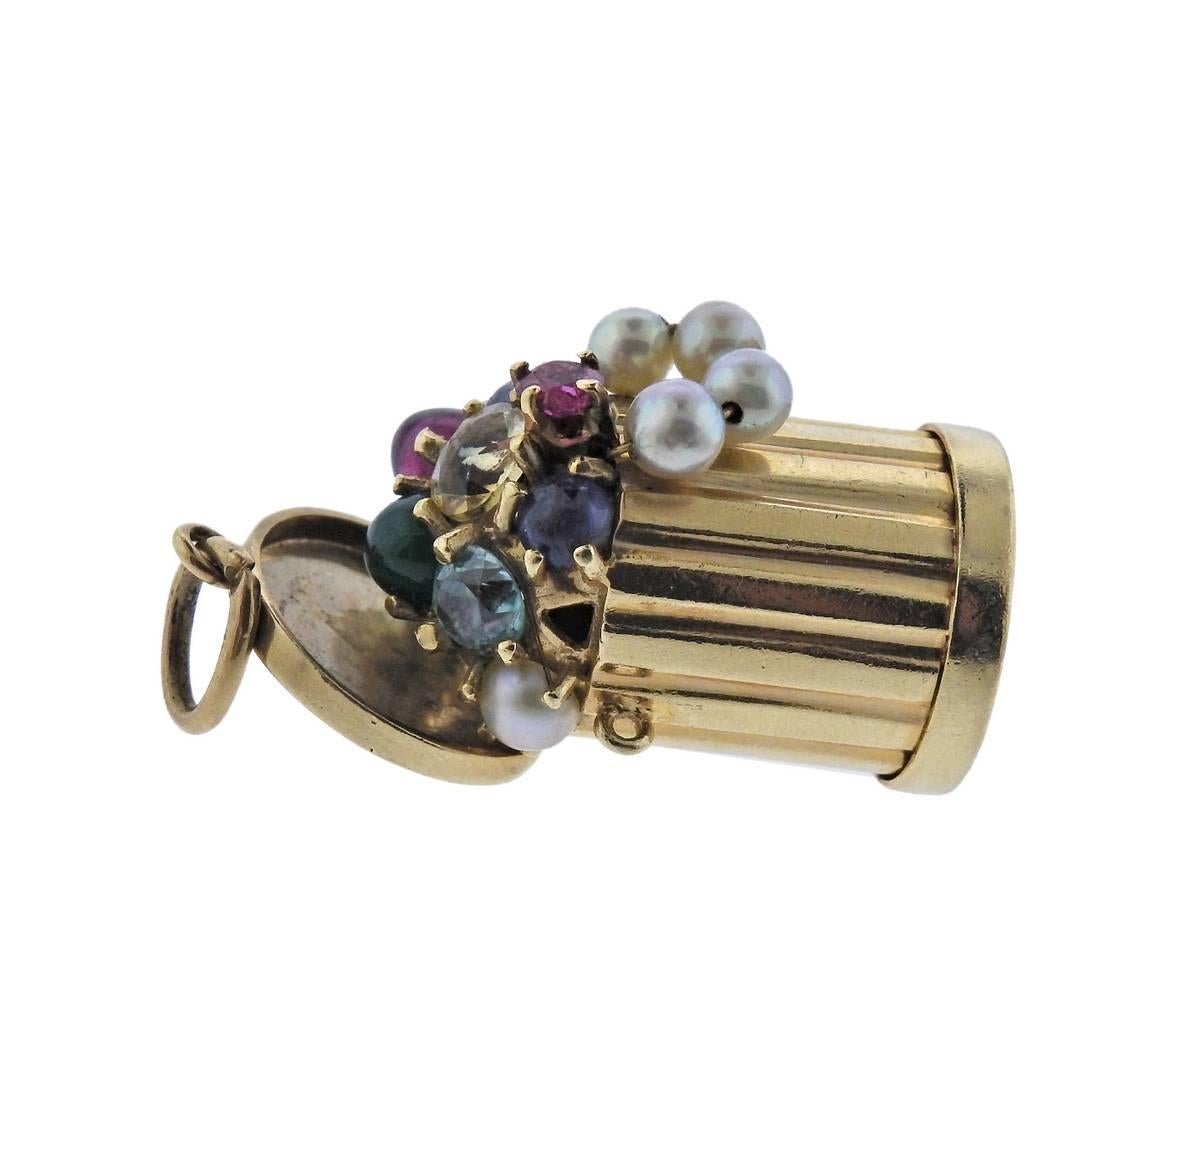 14k gold mid century charm featuring pearls, ruby, sapphire and emeralds. Charm measures 35mm X 18mm and weighs 16.4 grams. Marked 14k, 